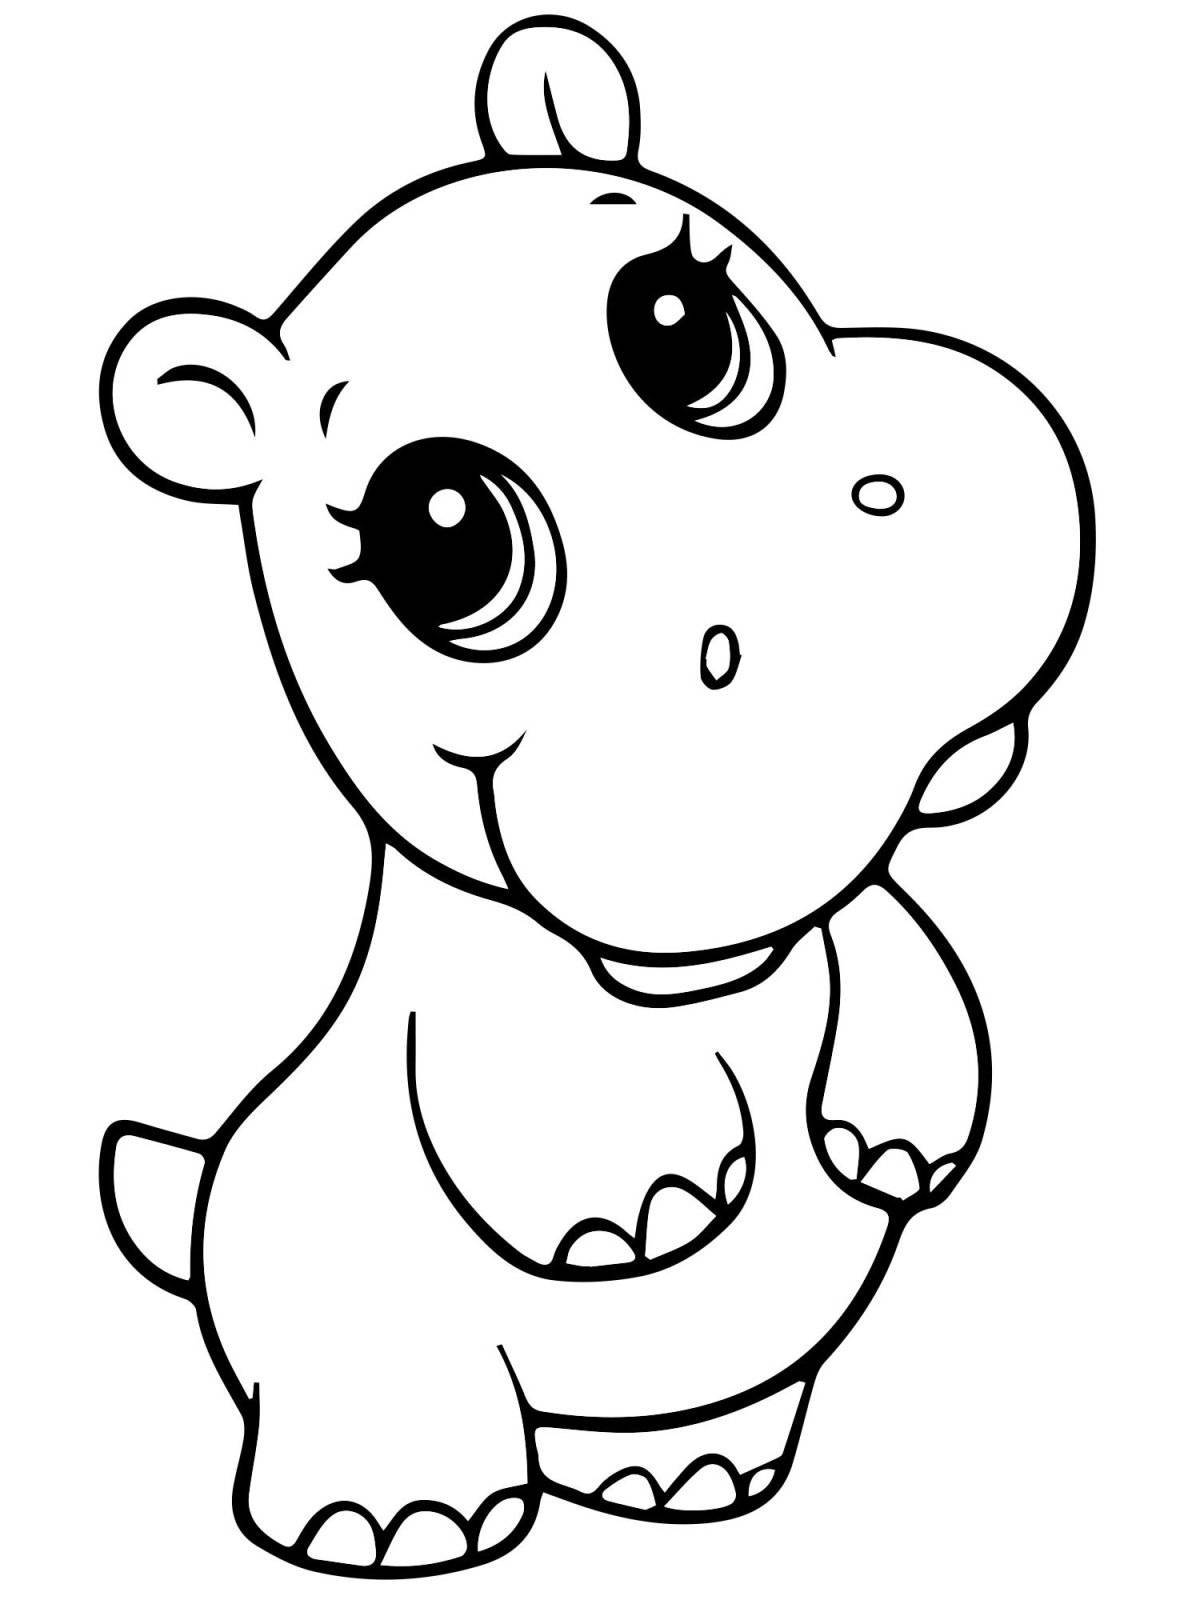 Violent coloring pages animals for children 6-7 years old